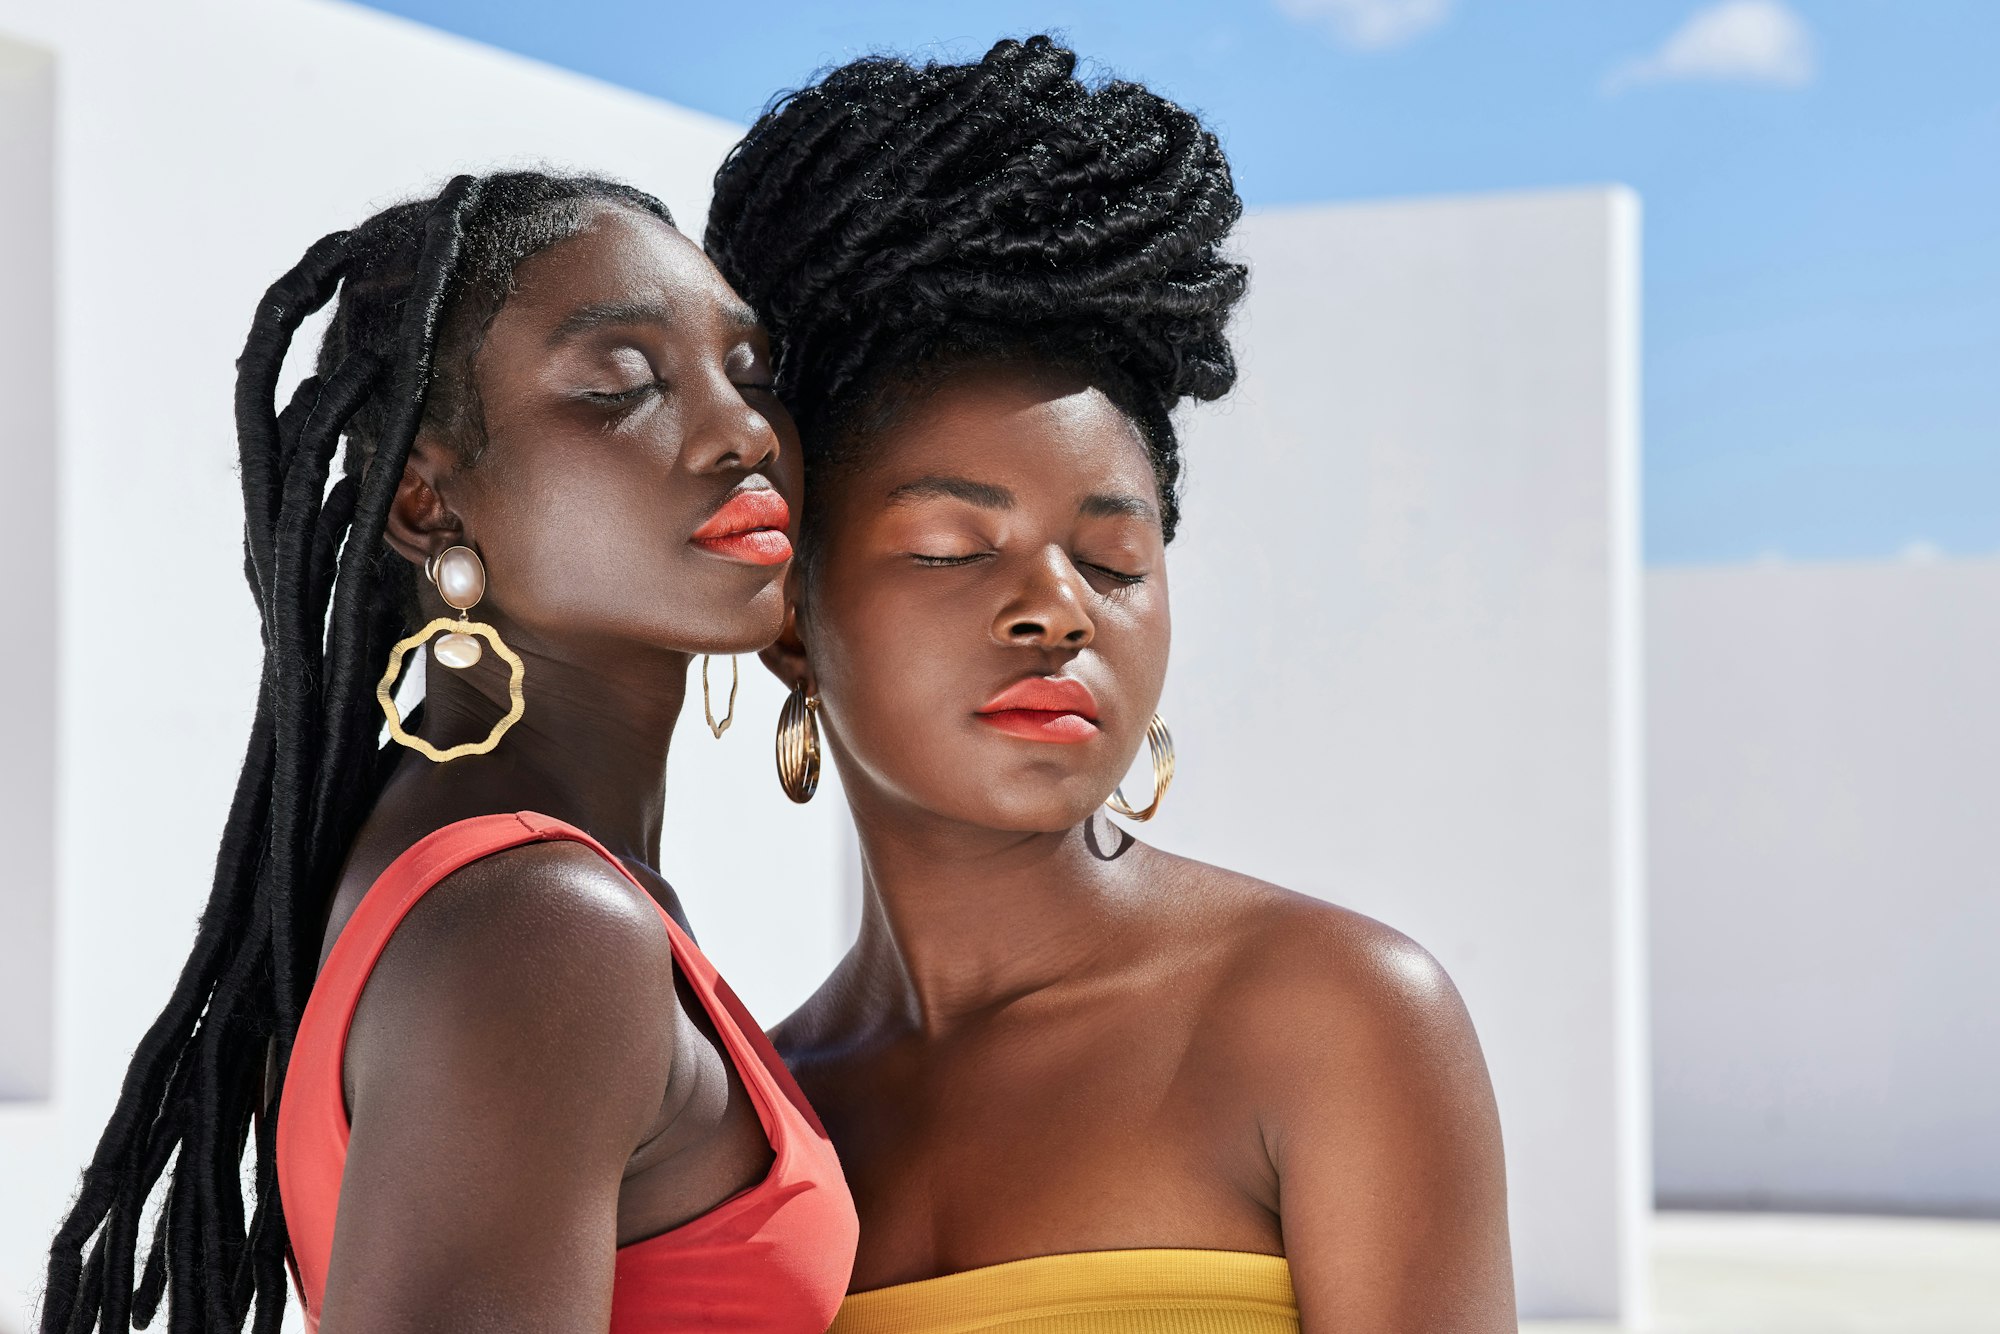 Bright and bold. Cropped shot of two attractive young women posing on a rooftop outdoors.